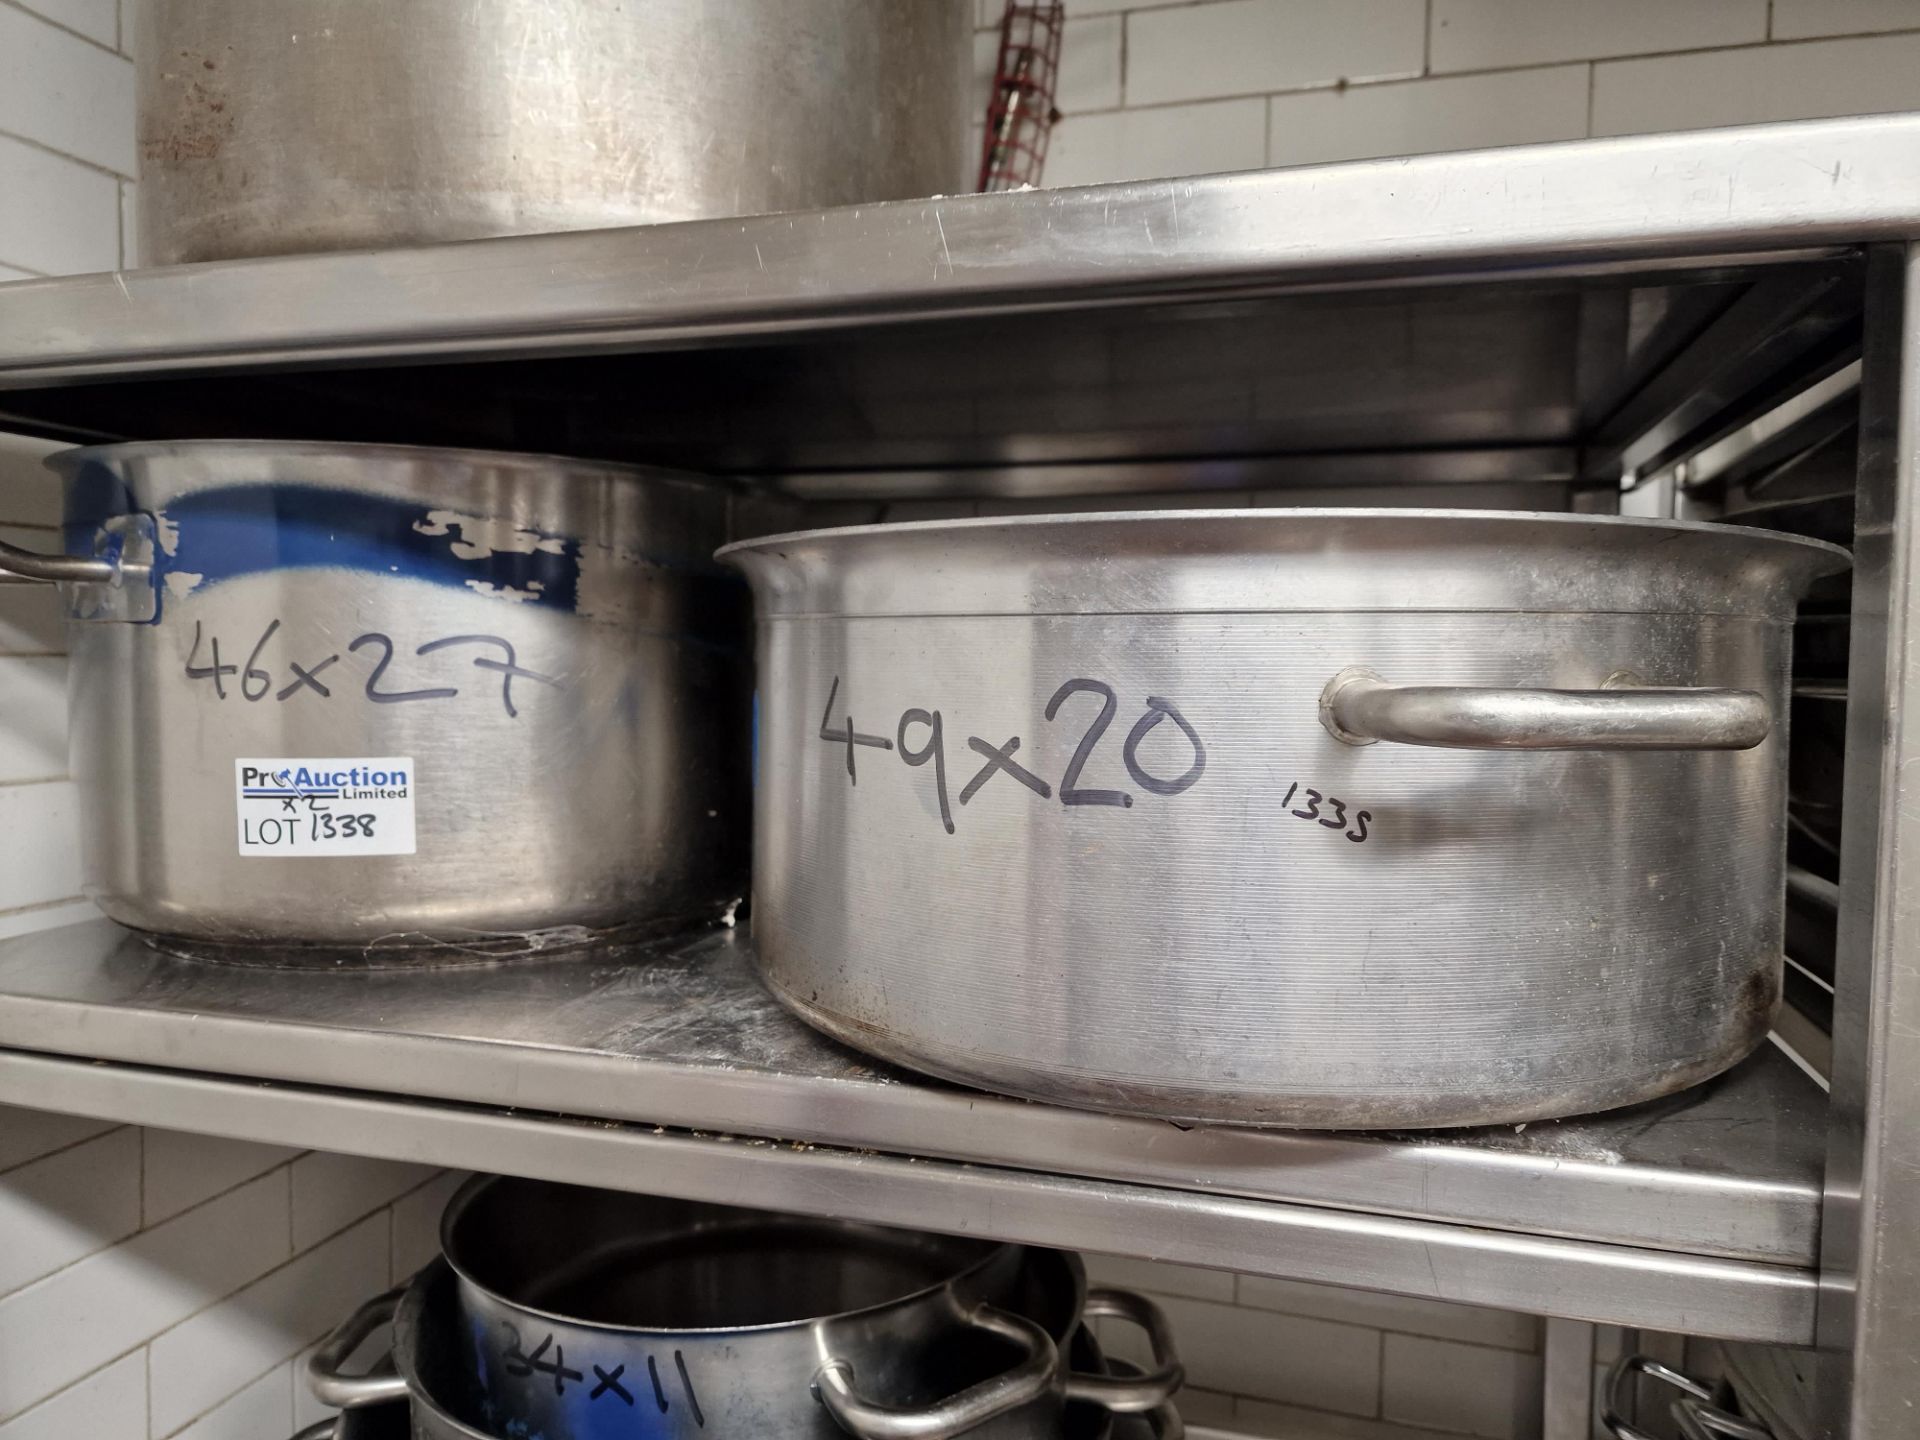 2 x Stainless Steel Commercial Stock Pots 46 x 27cm And 49 x 20cm Approximately 45 Litre And 38